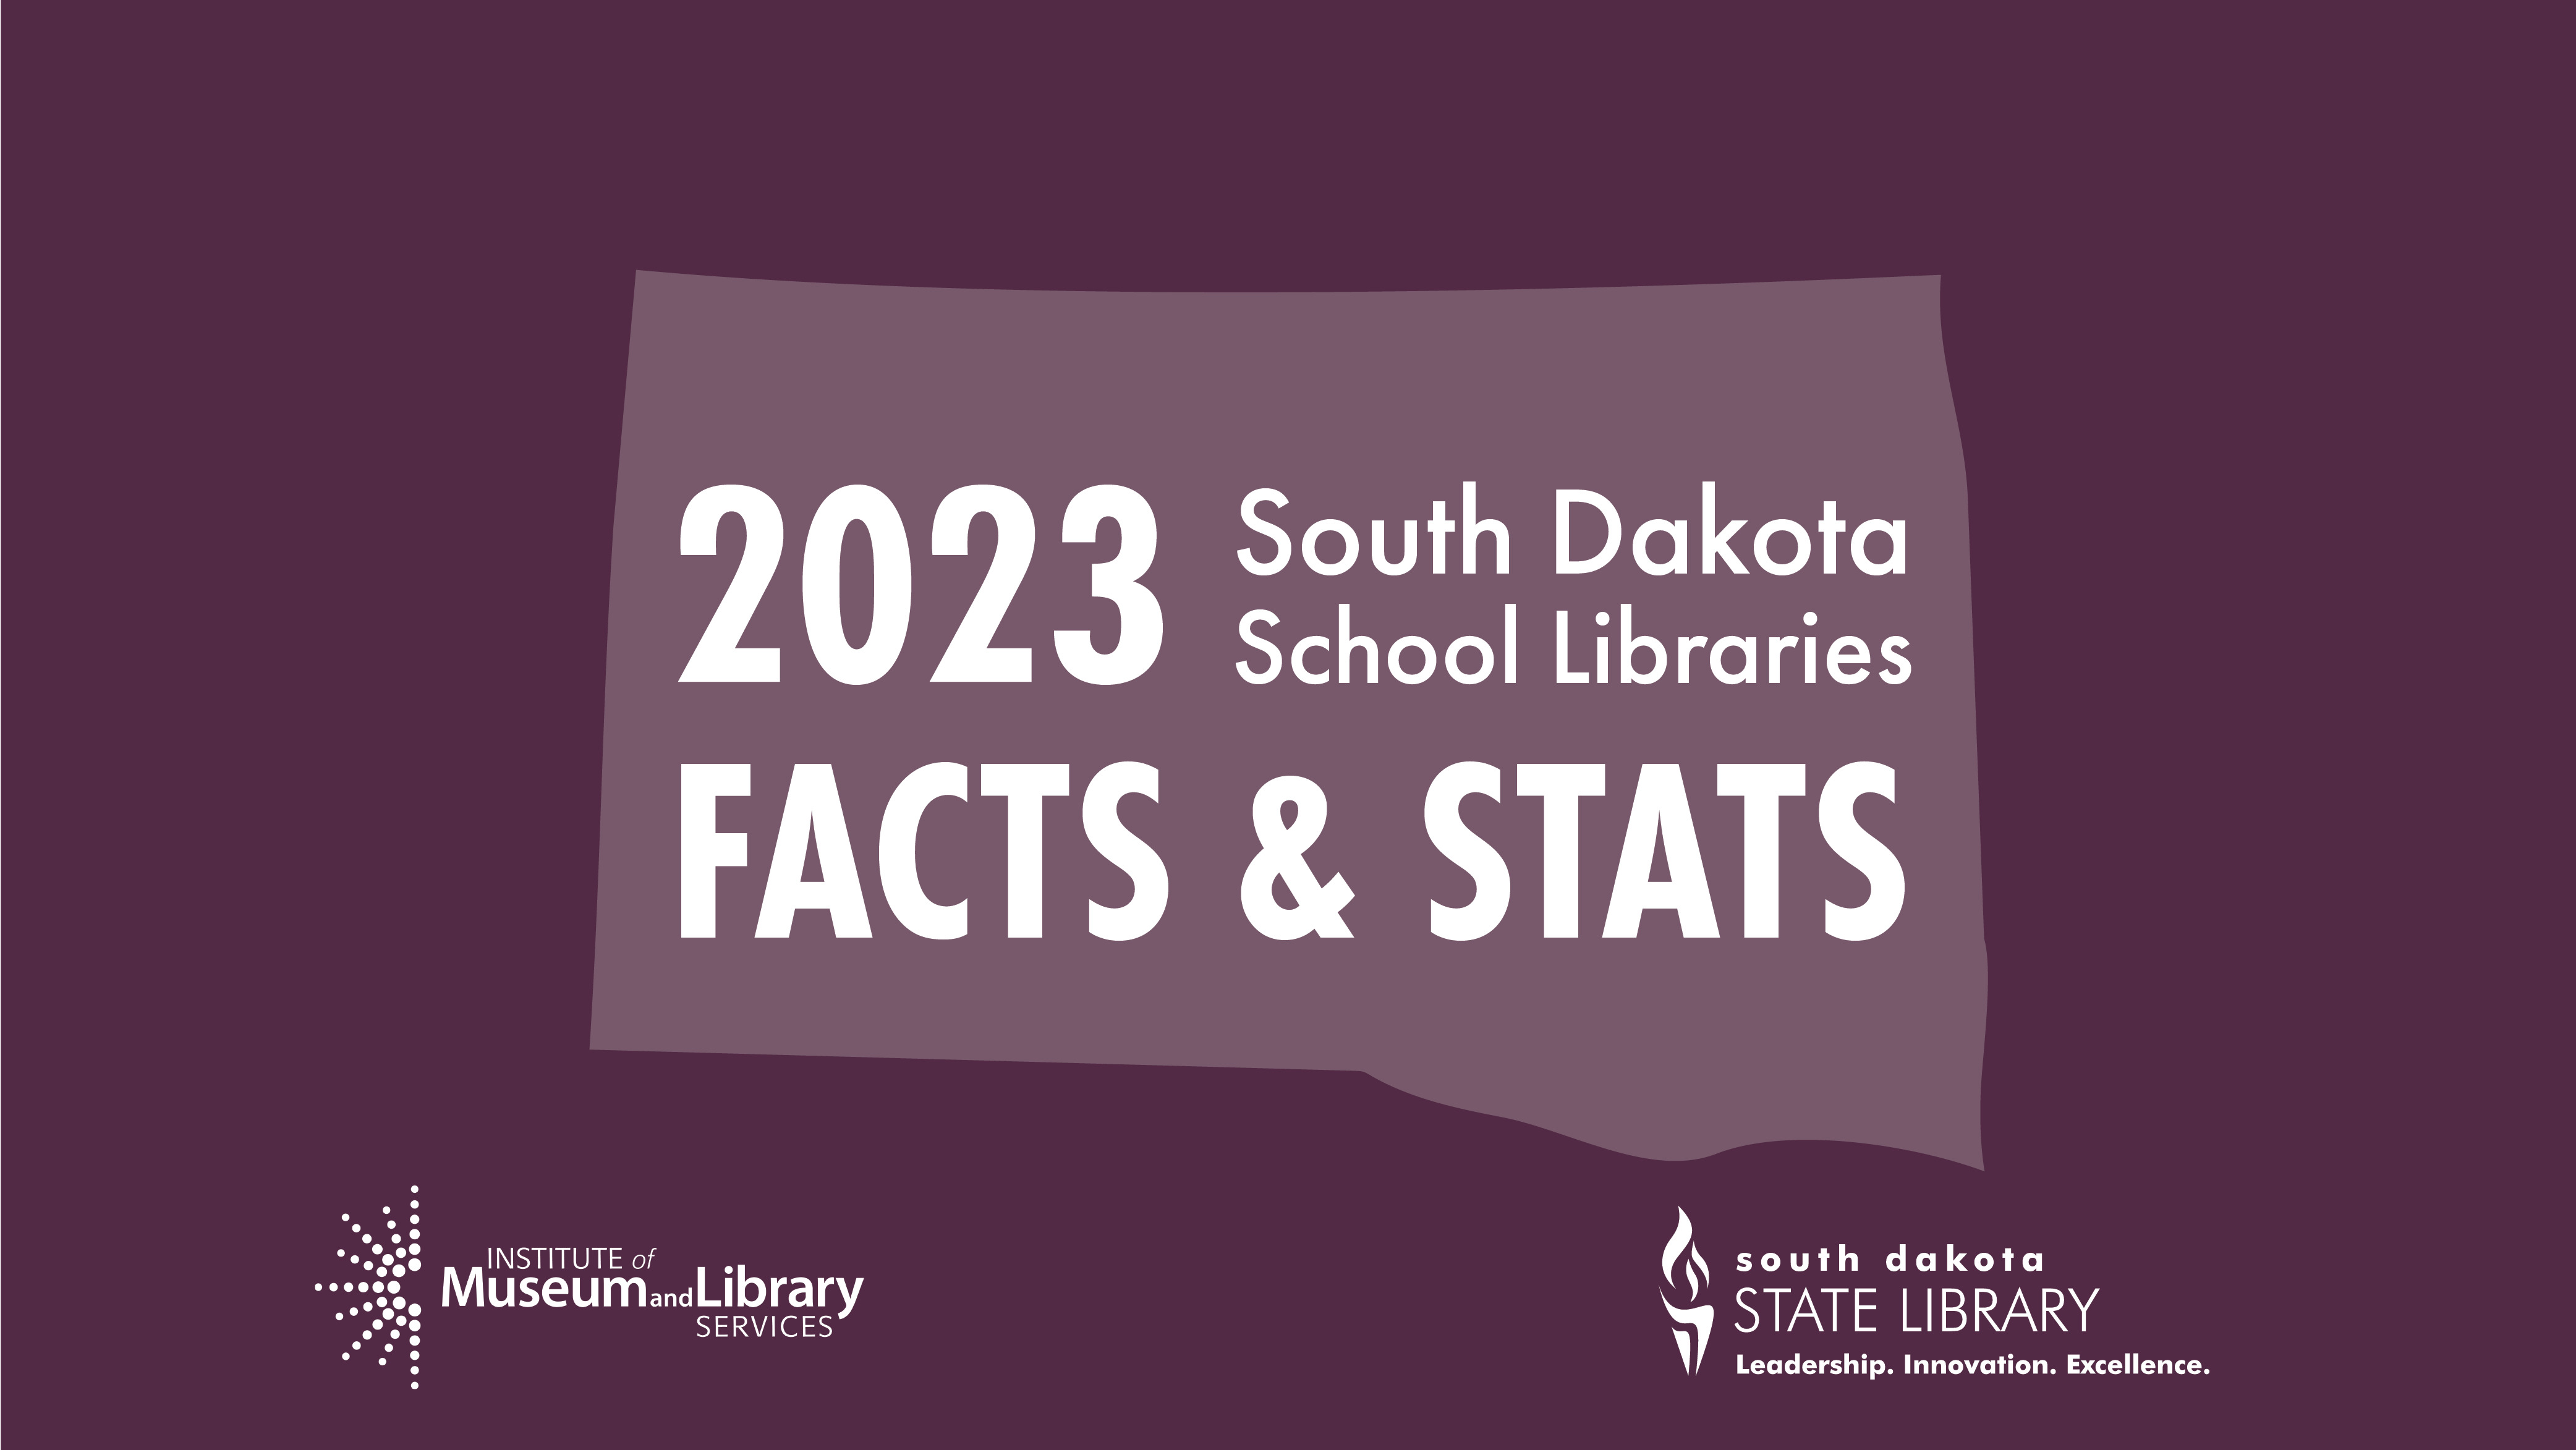 2022 School Libraries Facts and Stats; purple shape of south dakota with south dakota state library logo